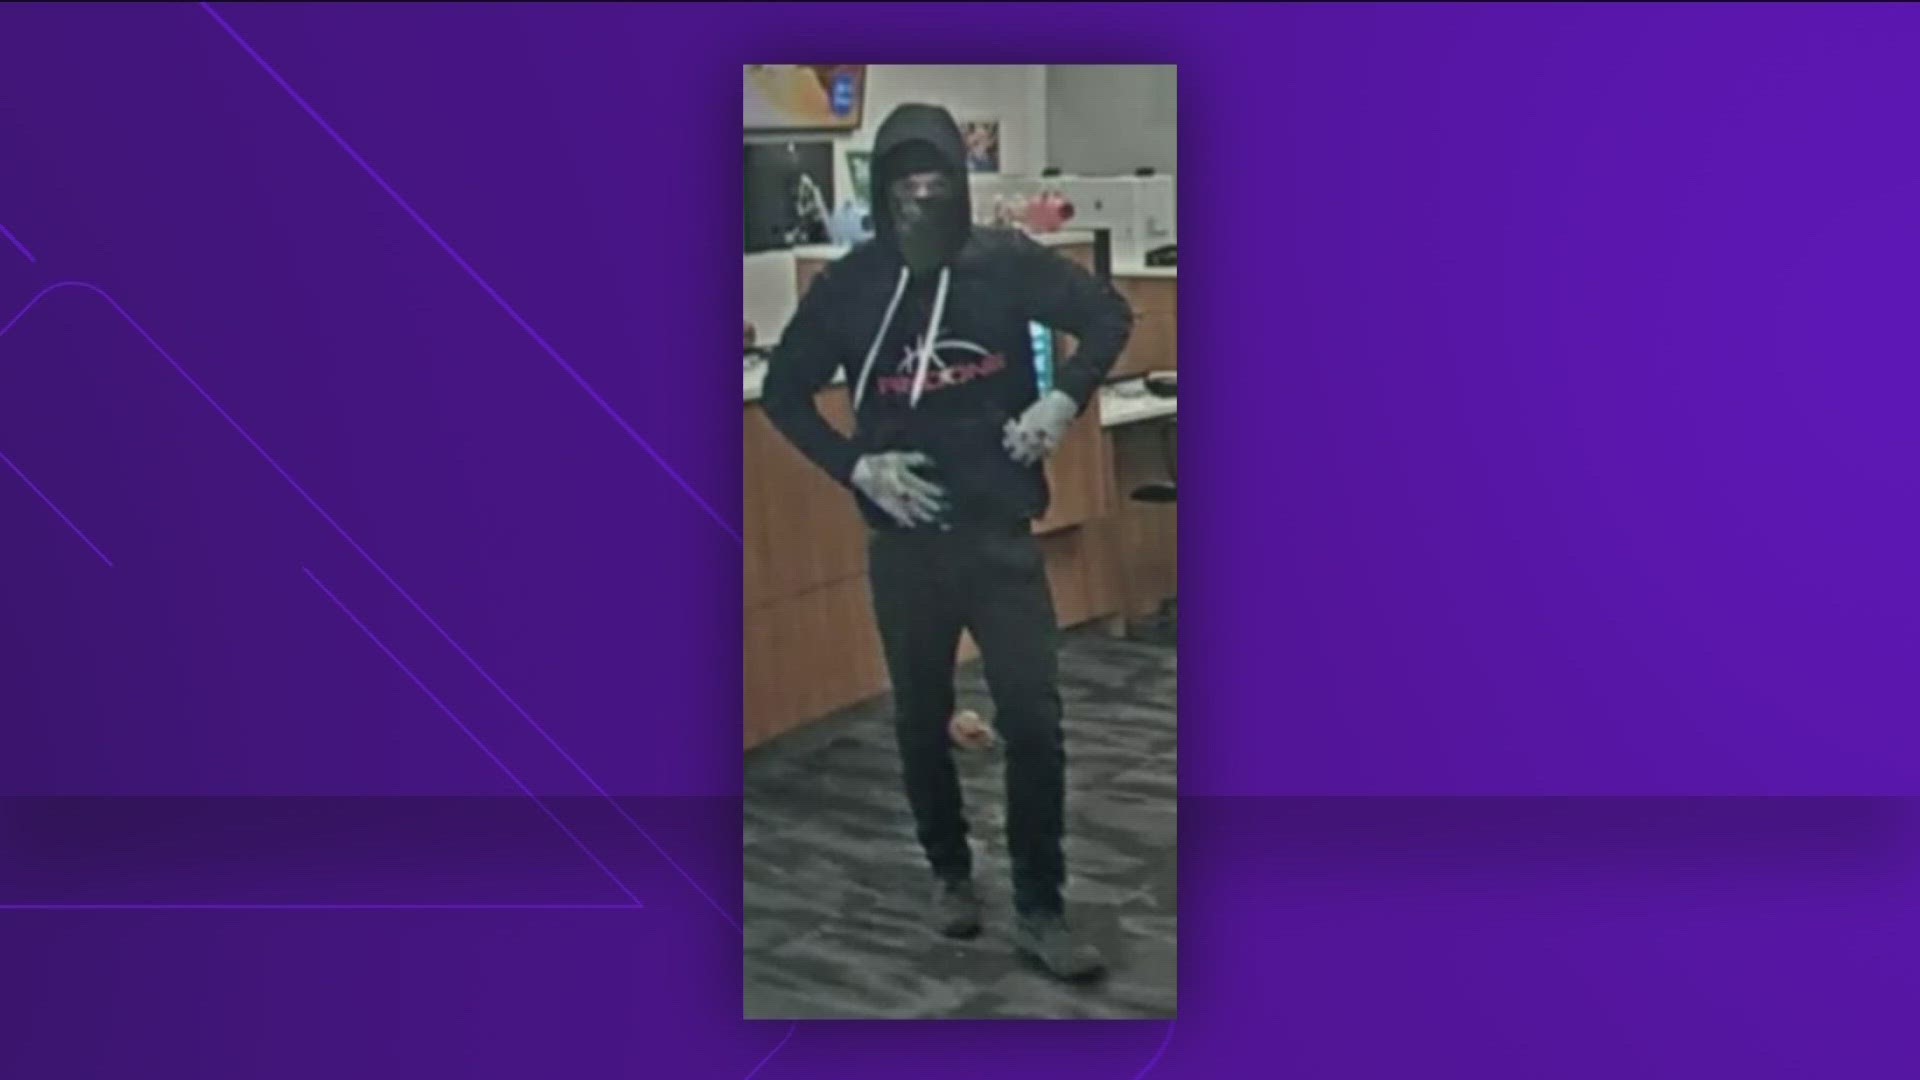 The robbery happened at a bank Saturday afternoon on Fairview Ave., between Five Mile and N. Hampton.